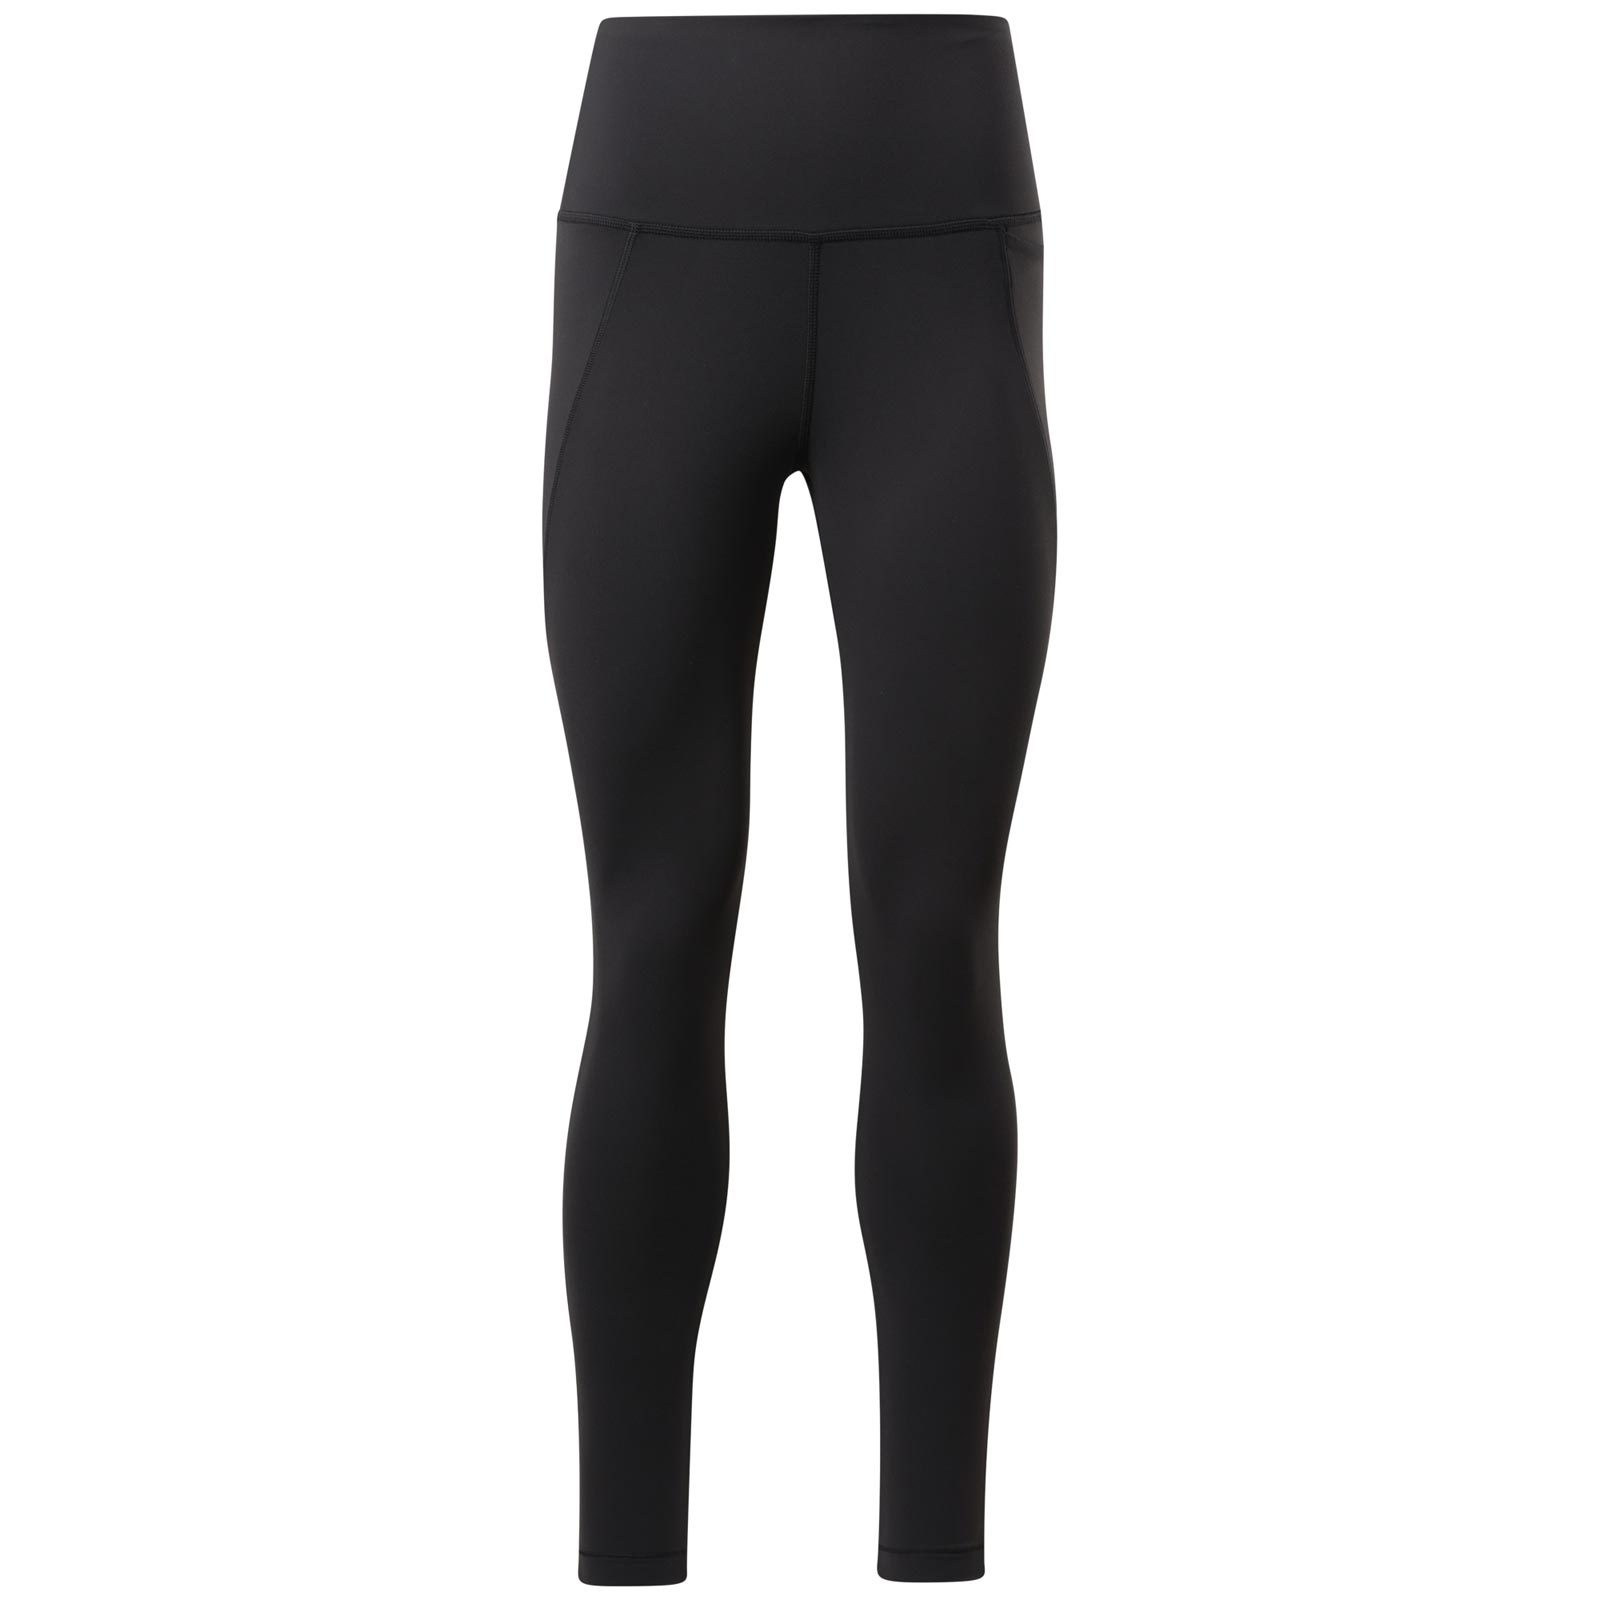 REEBOK TS WOMENS LUX HIGH-WAISTED TIGHTS